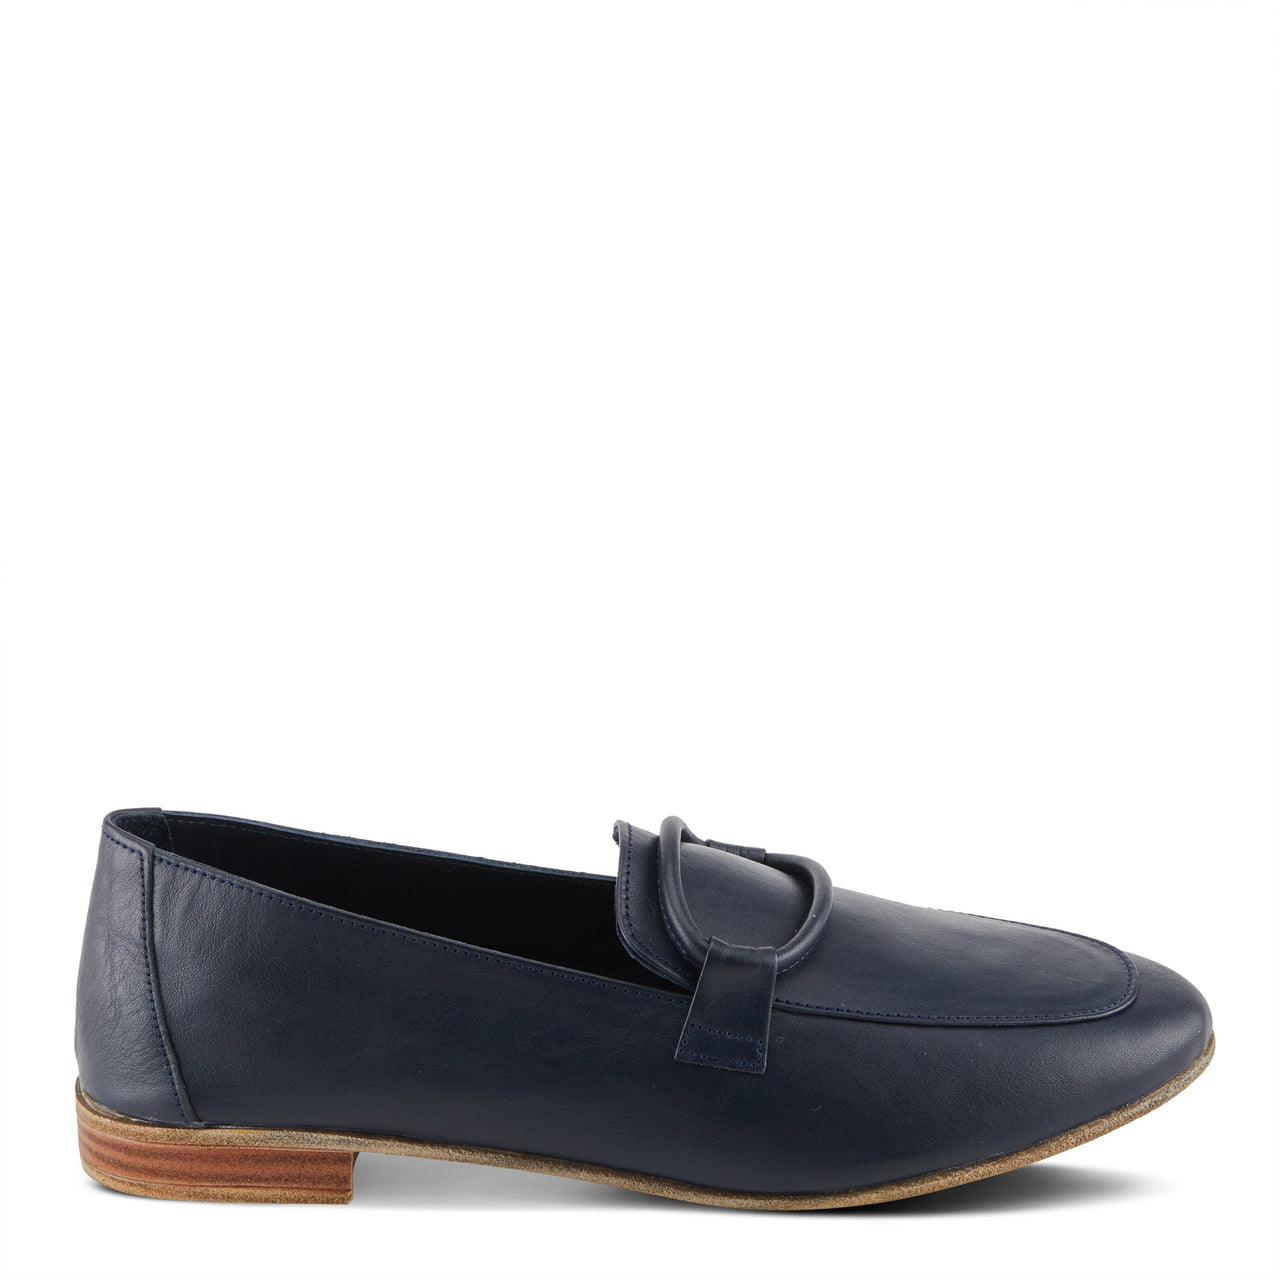 Handcrafted leather Spring Step Carrington shoes with cushioned insoles for all-day comfort and classic style